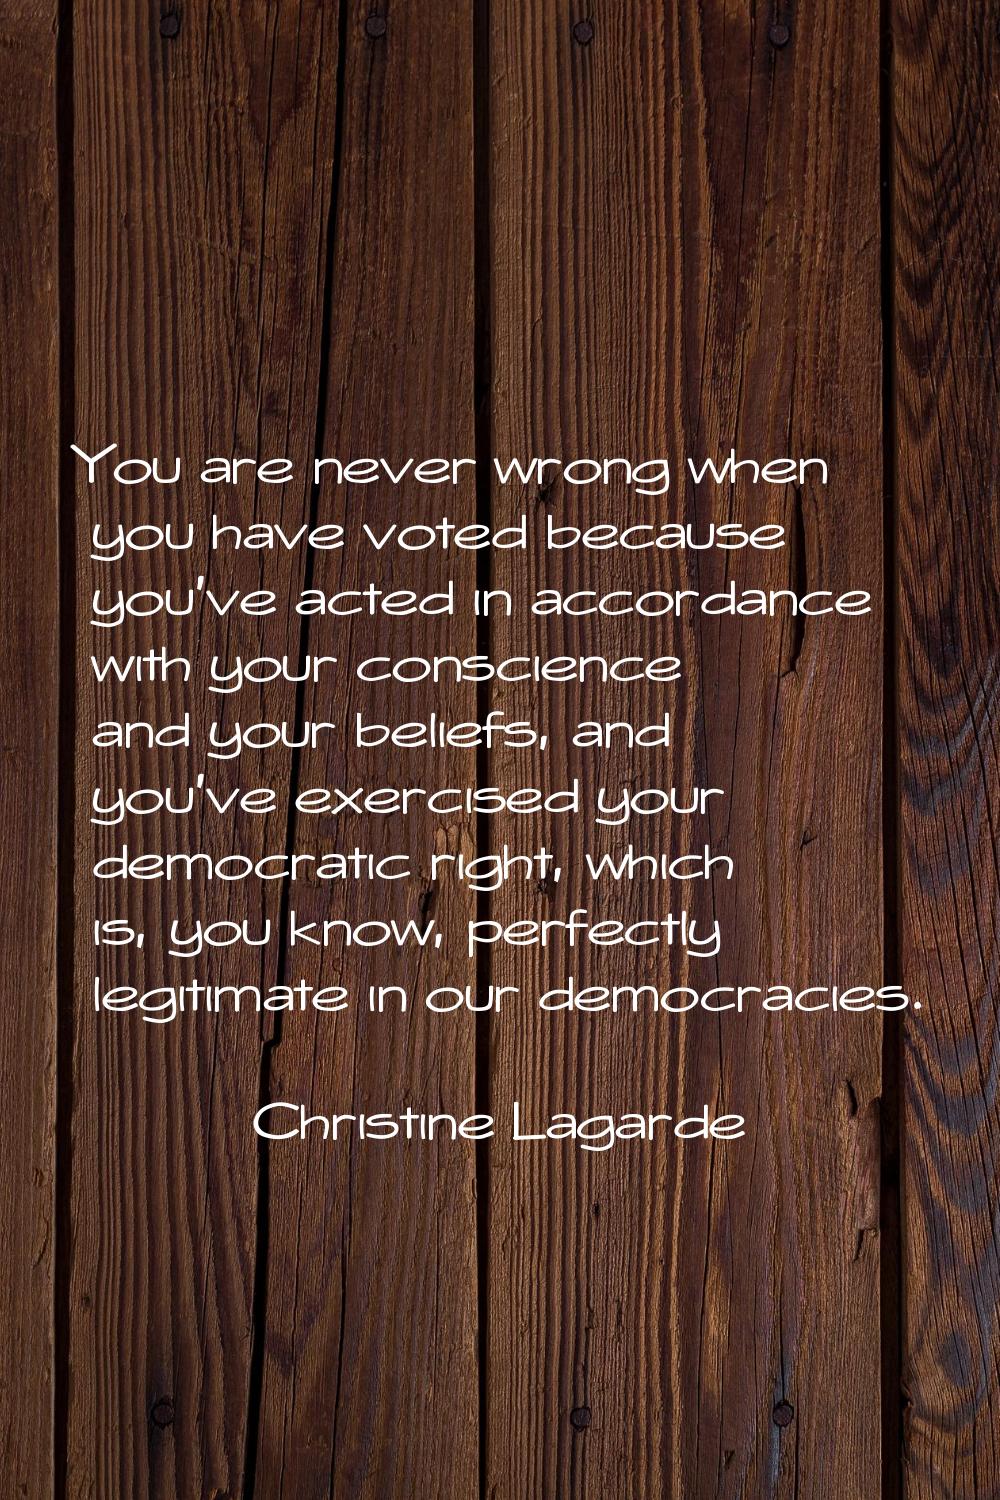 You are never wrong when you have voted because you've acted in accordance with your conscience and